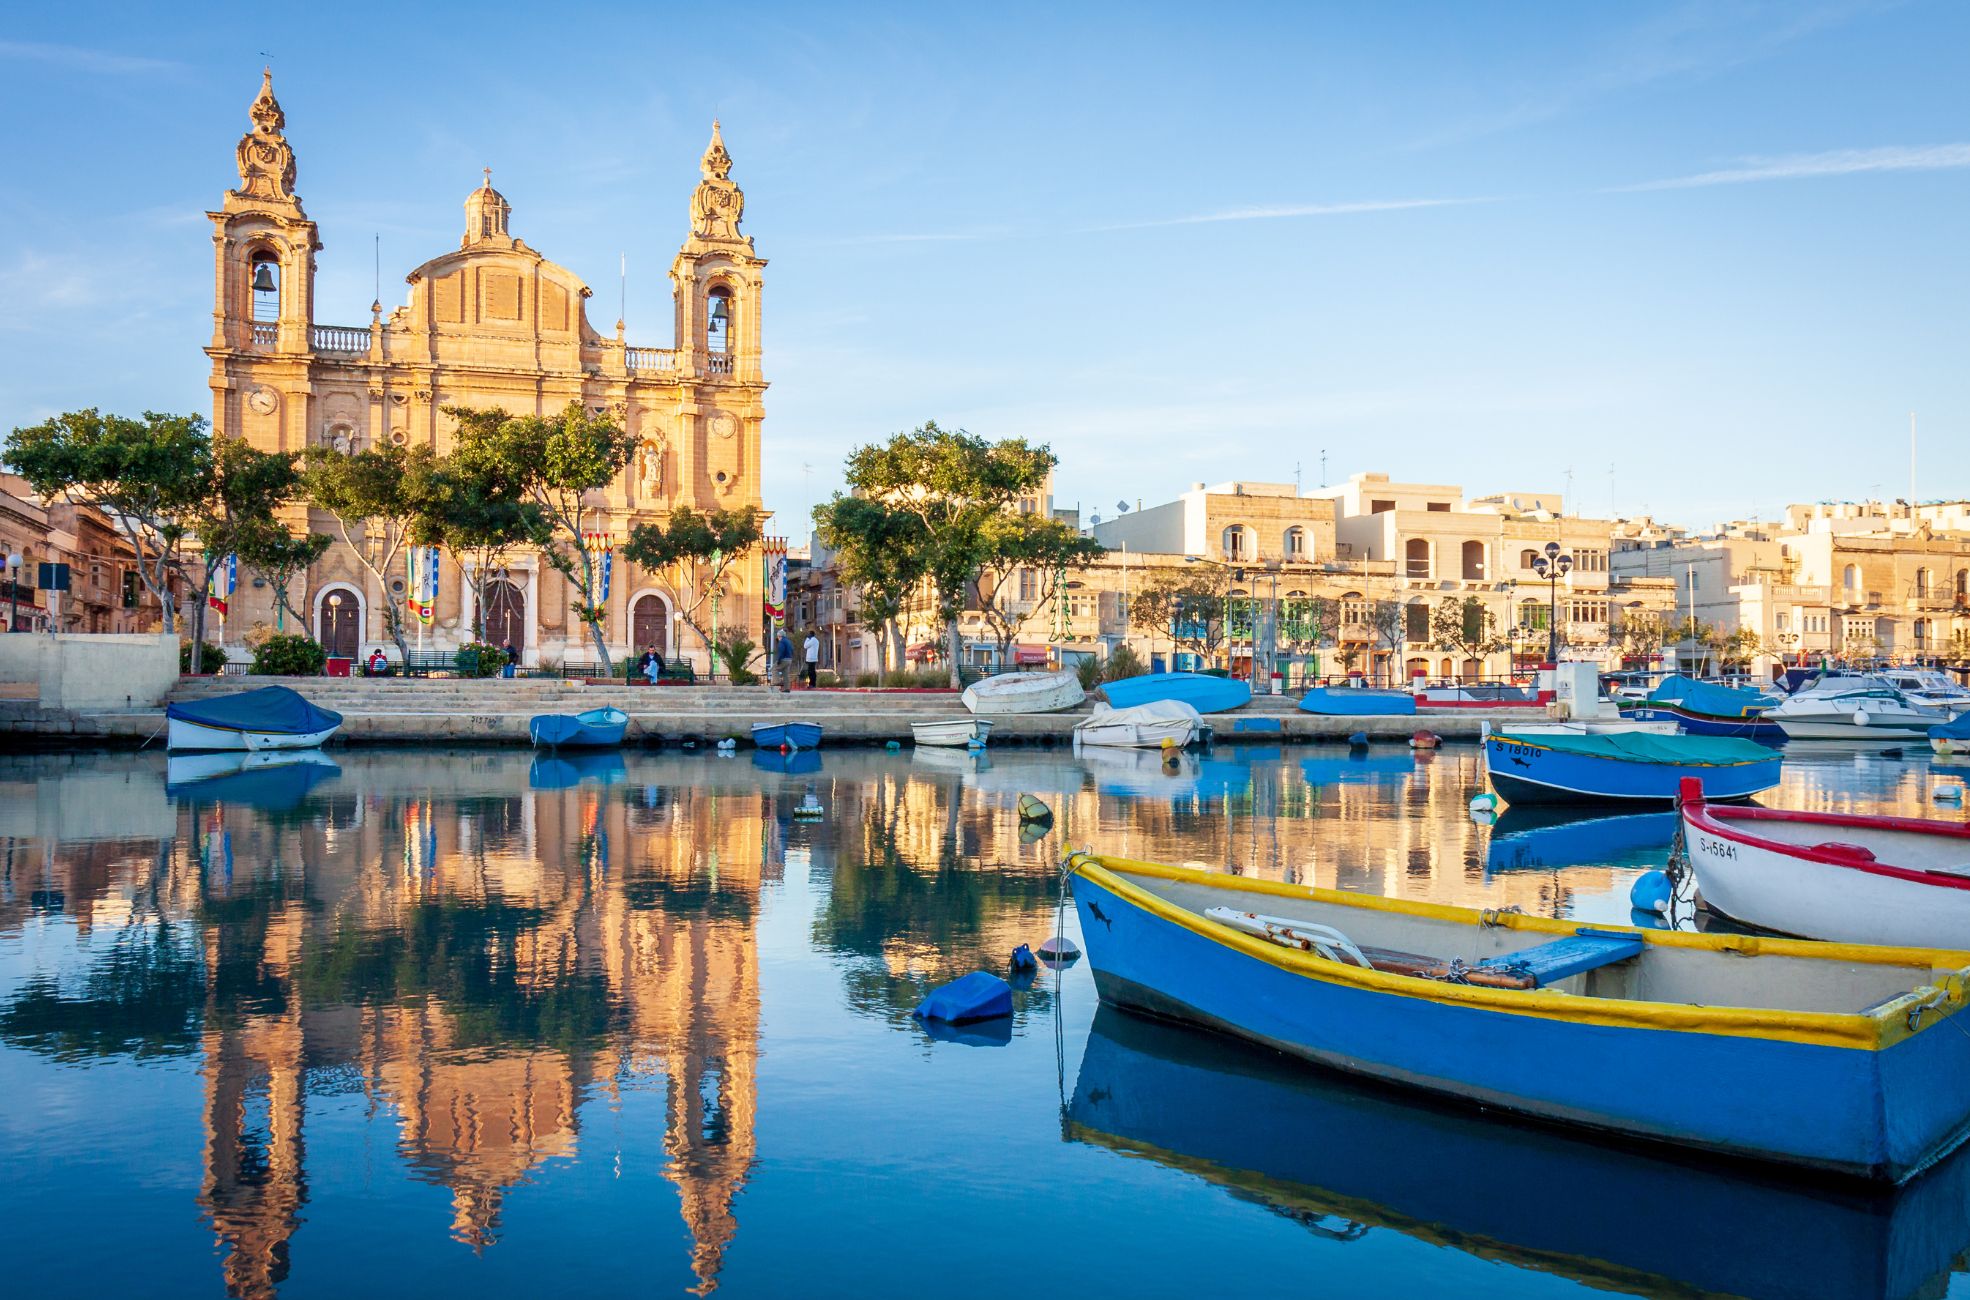 Boats On Water In Malta